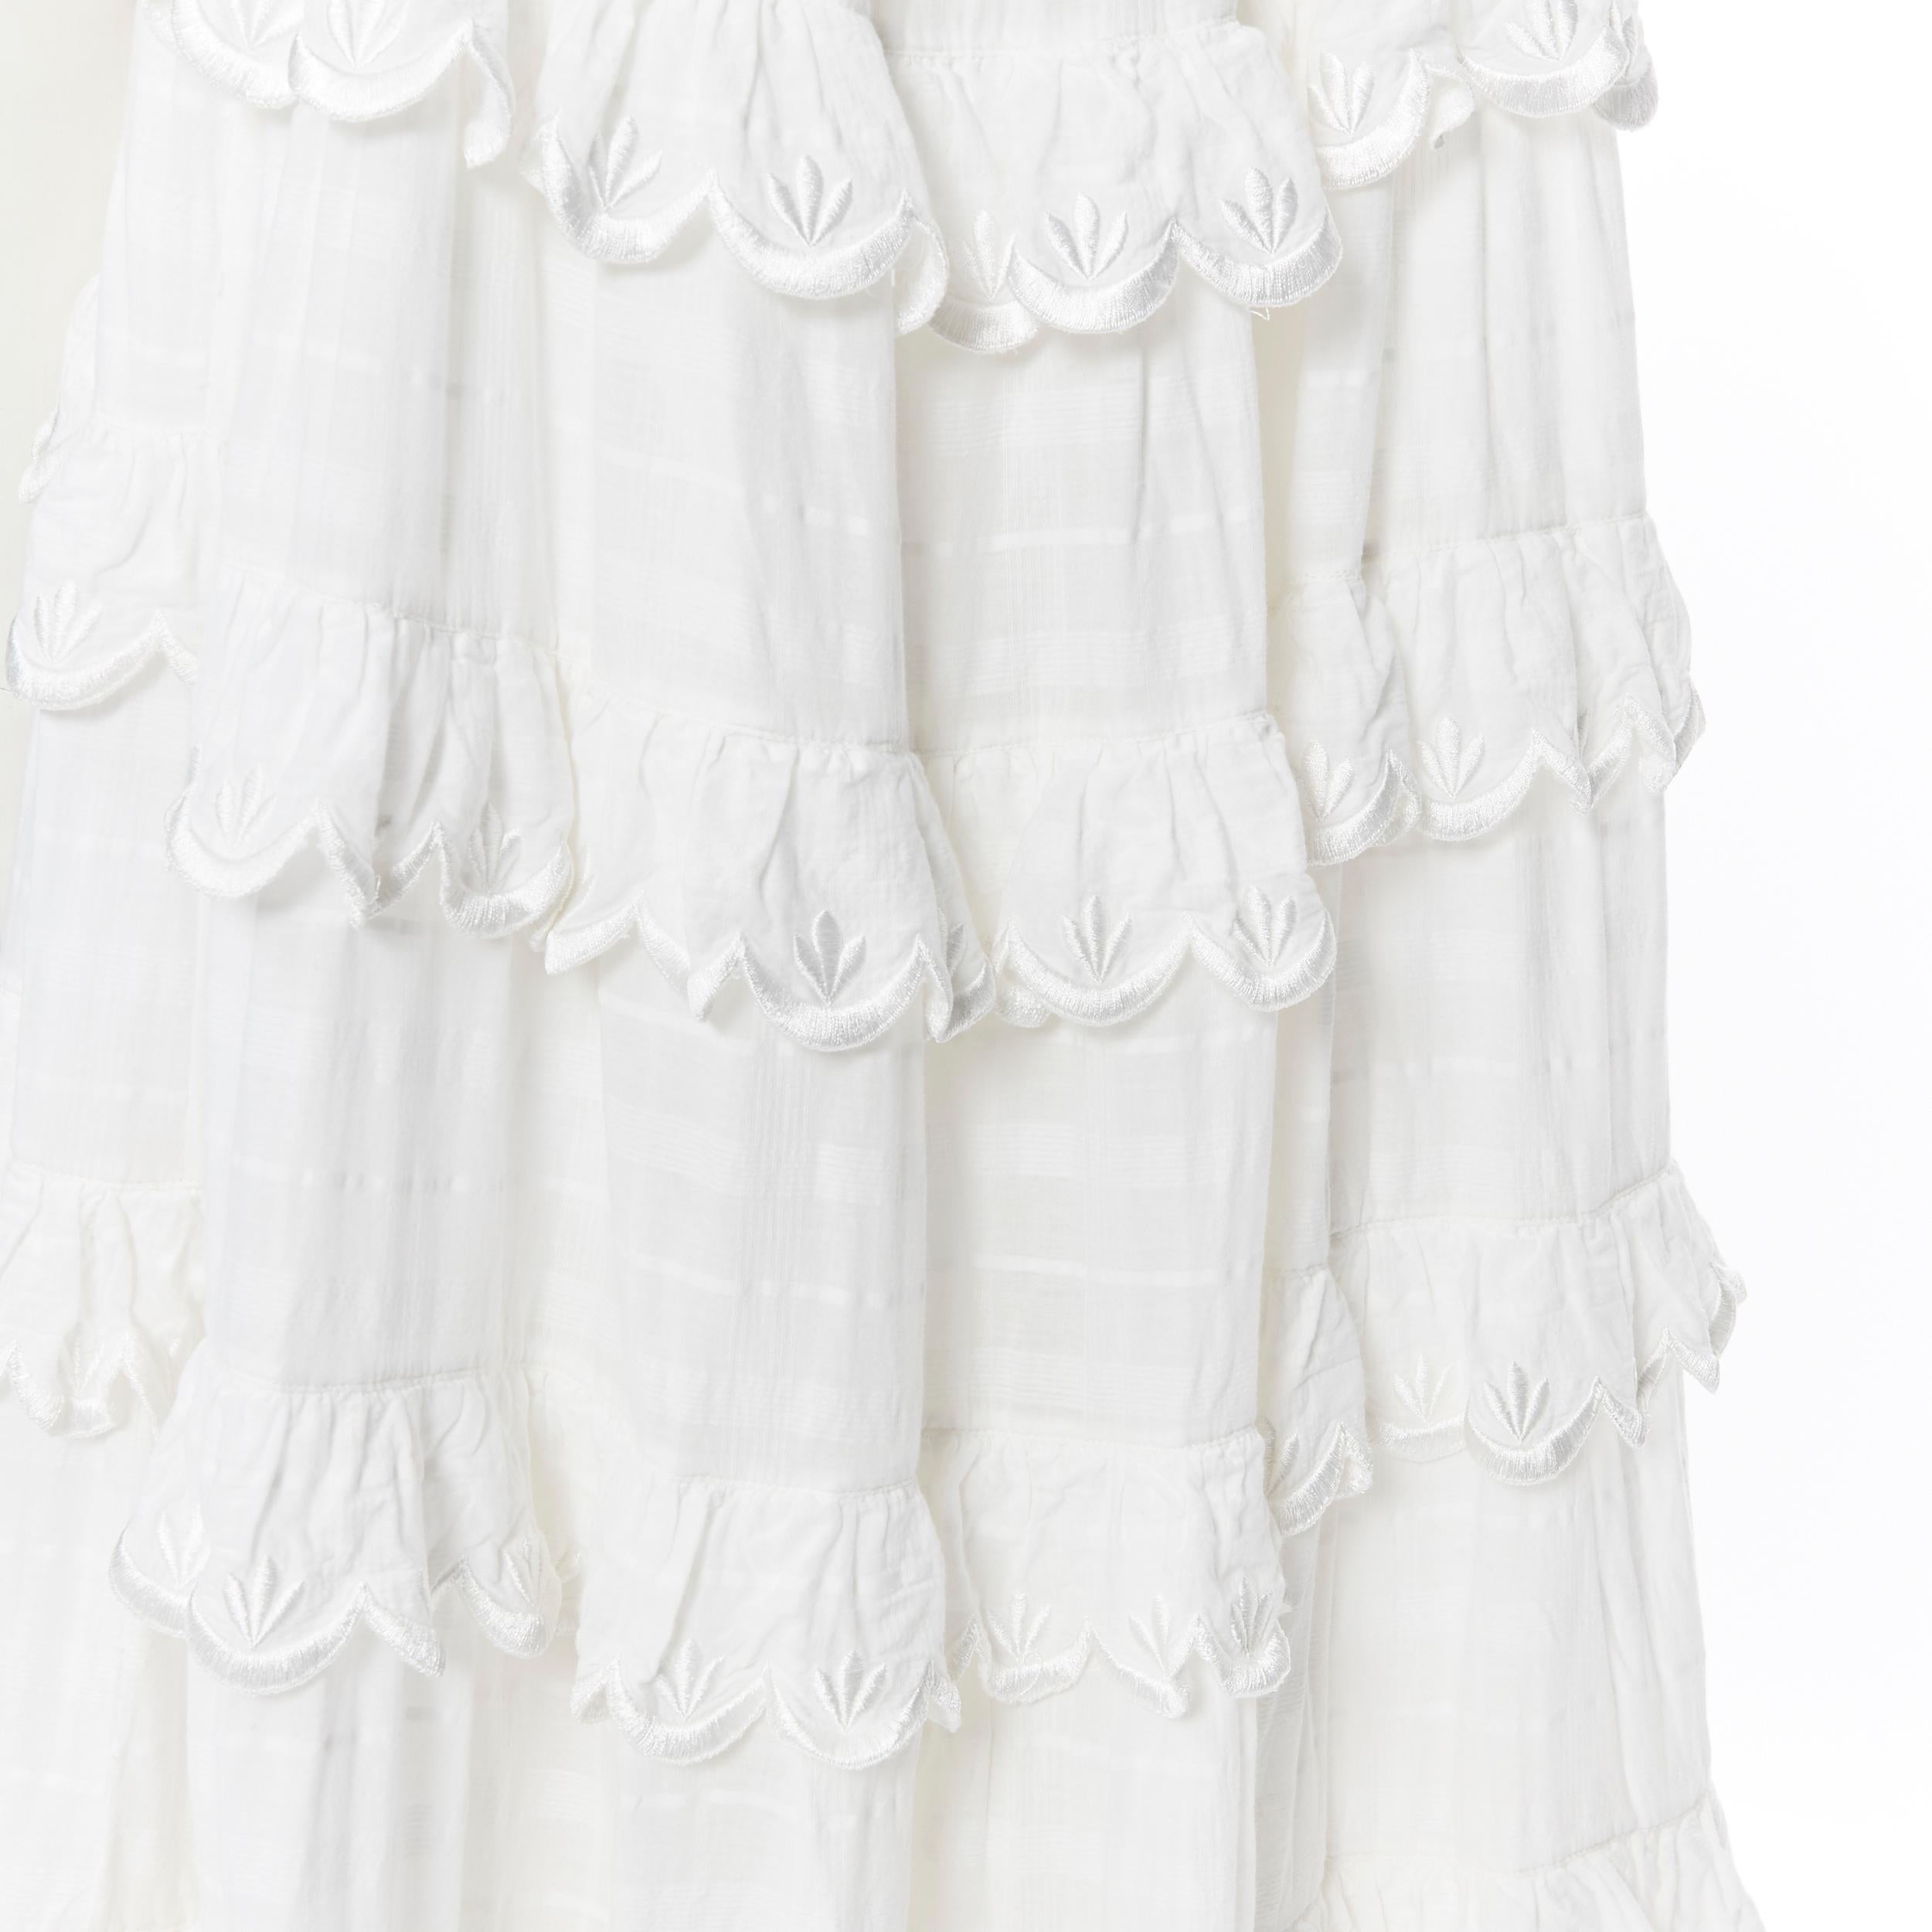 INNIKA CHOO white cotton embroidered scallop petal tiered bohemian tent dress
Brand: Innika Choo
Designer: Innika Choo
Model Name / Style: Bohemian Dress
Material: Other; feels like cotton
Color: White
Pattern: Solid
Extra Detail: Sleeveless. Wide